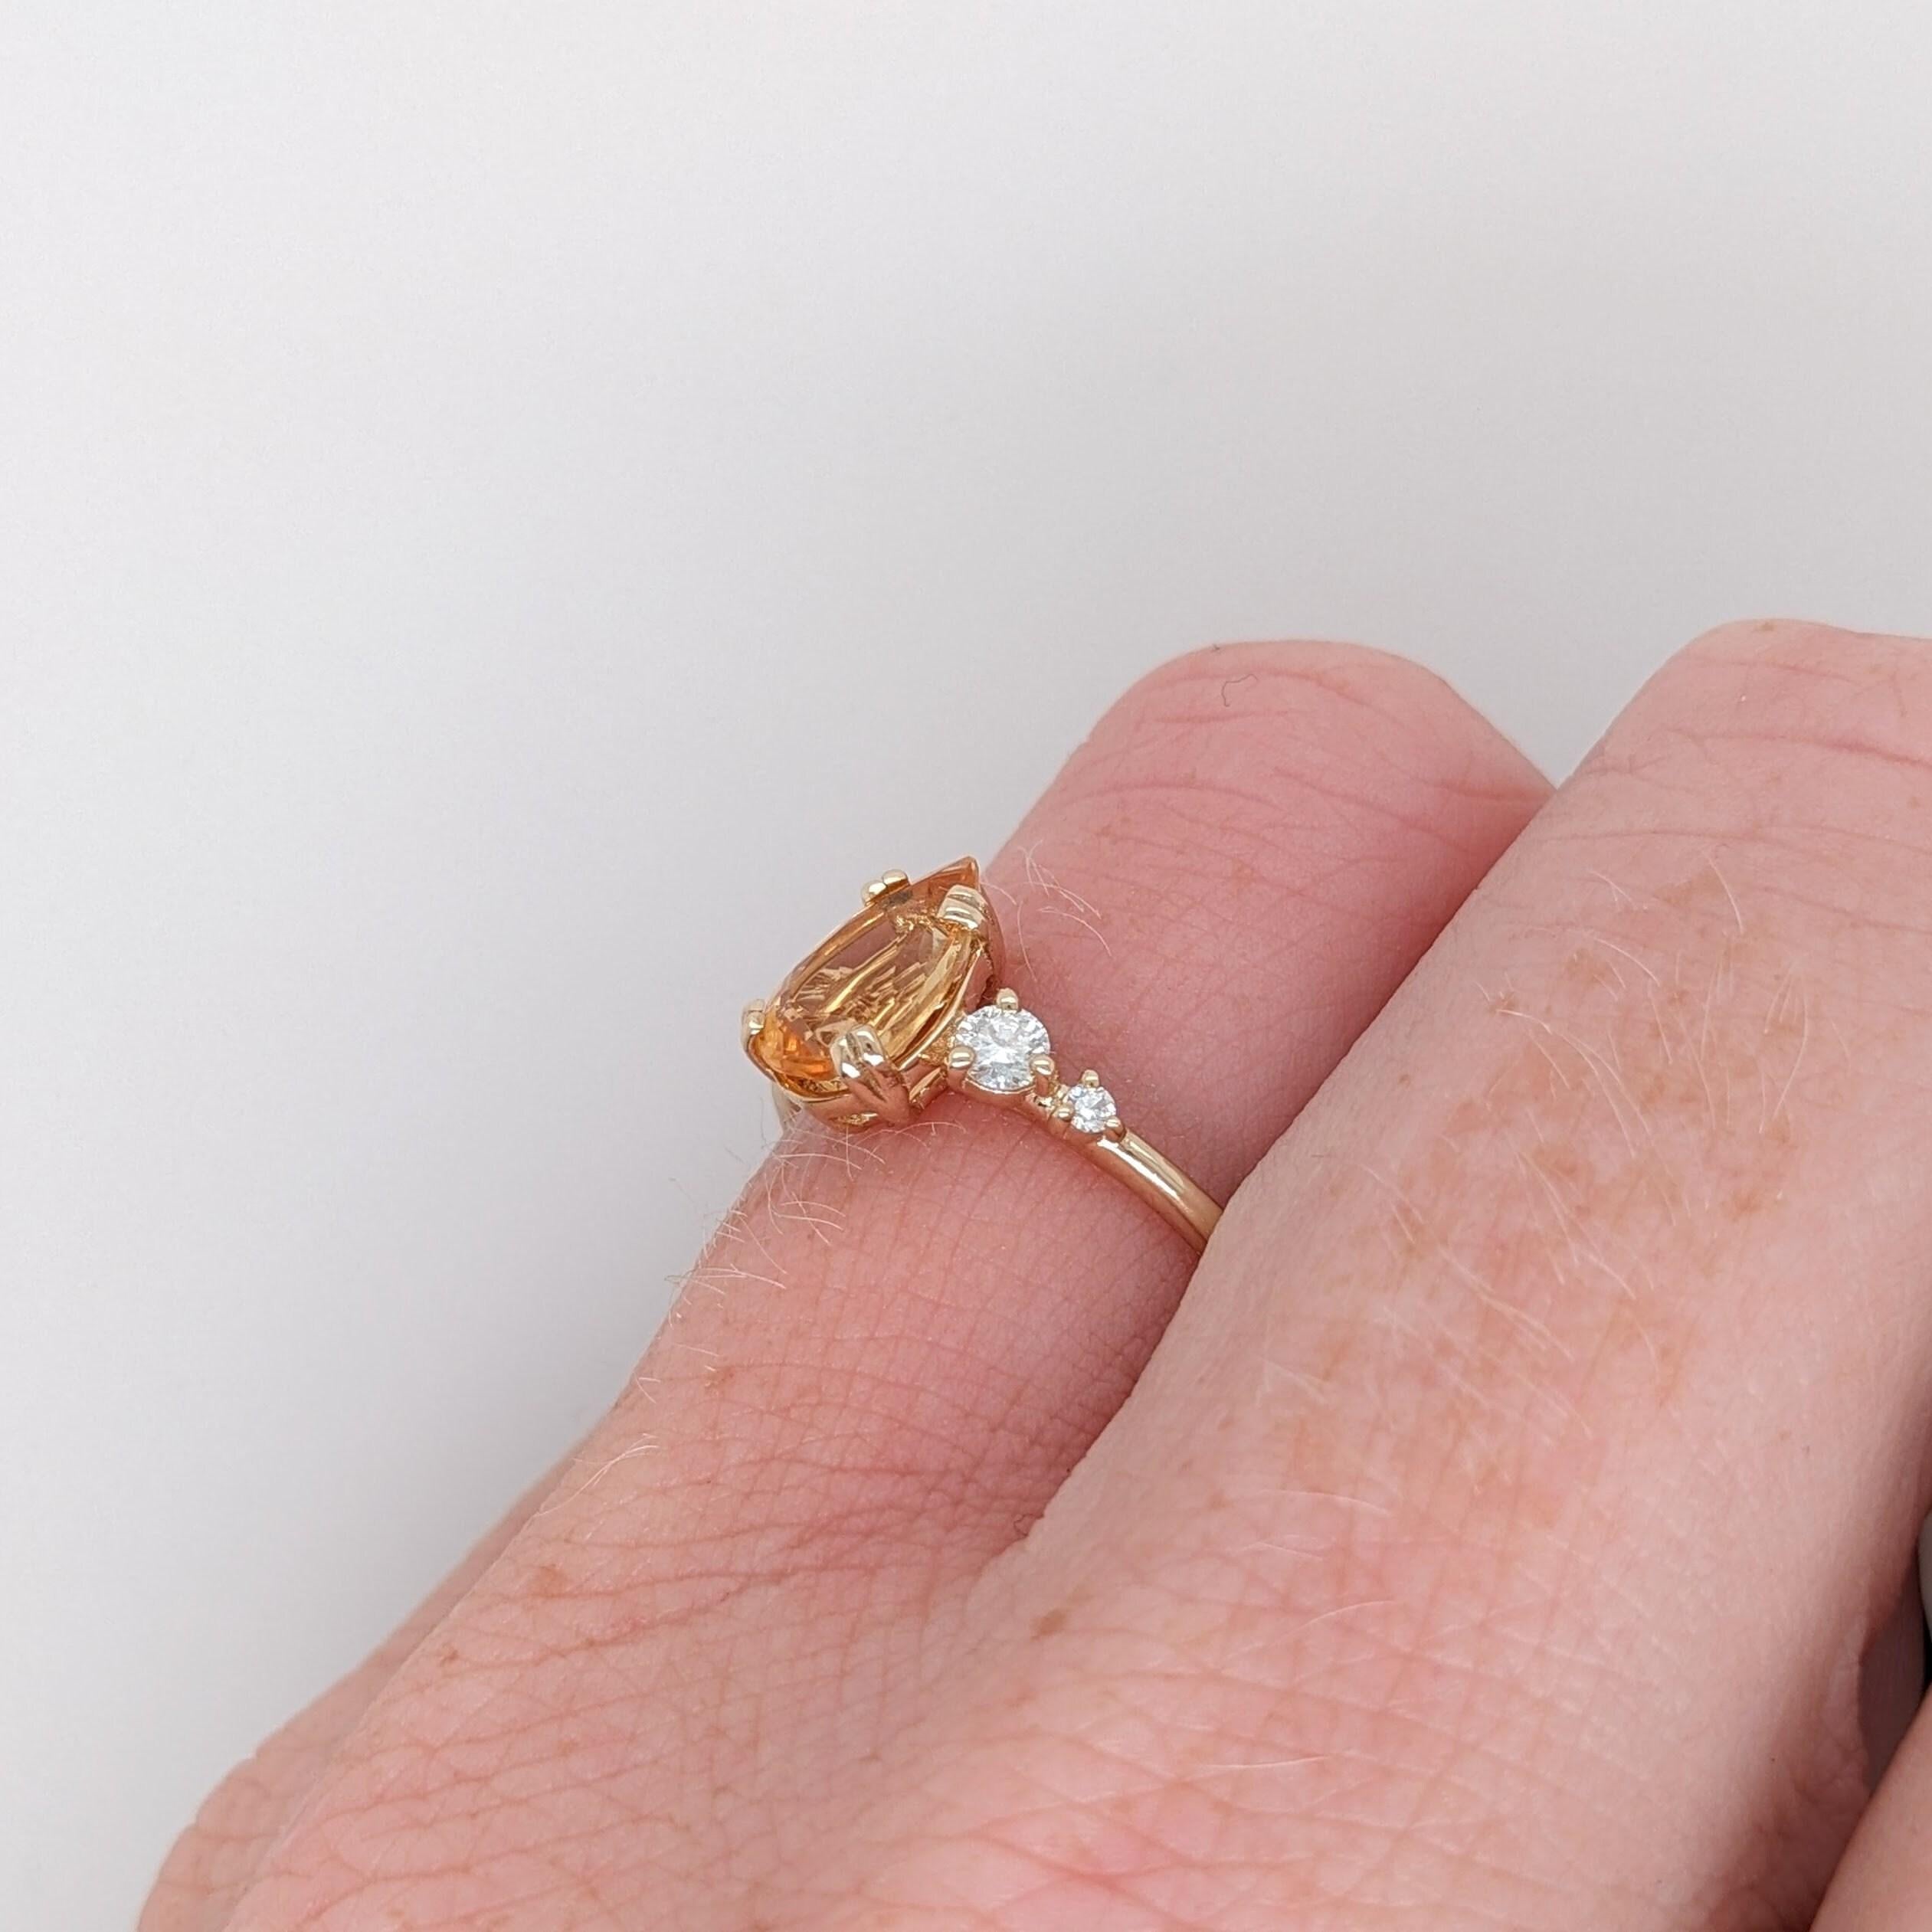 1ct Imperial Topaz Ring w Natural Diamonds in Solid 14k Yellow Gold Pear 9x5mm